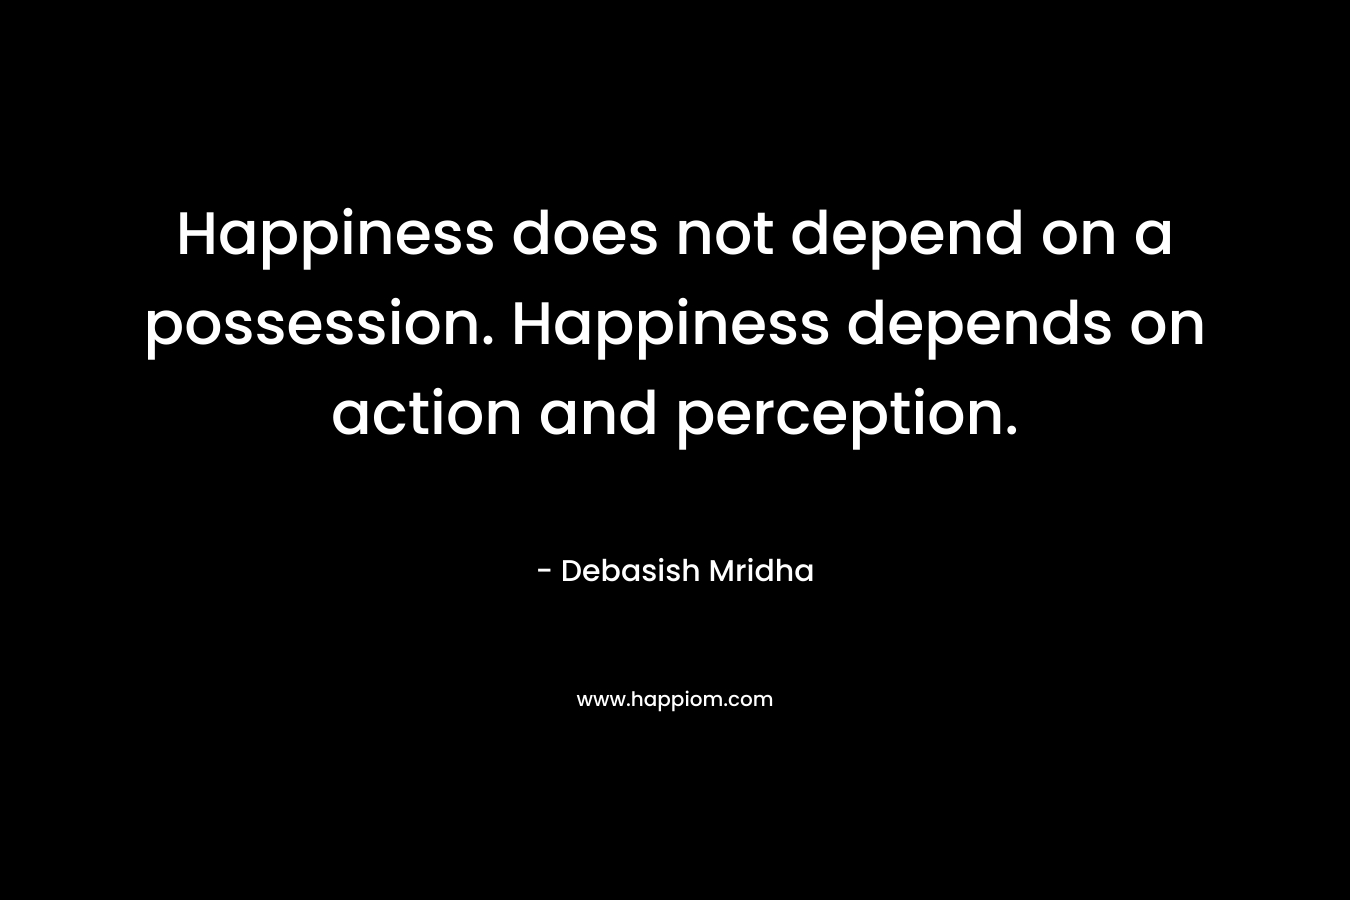 Happiness does not depend on a possession. Happiness depends on action and perception.